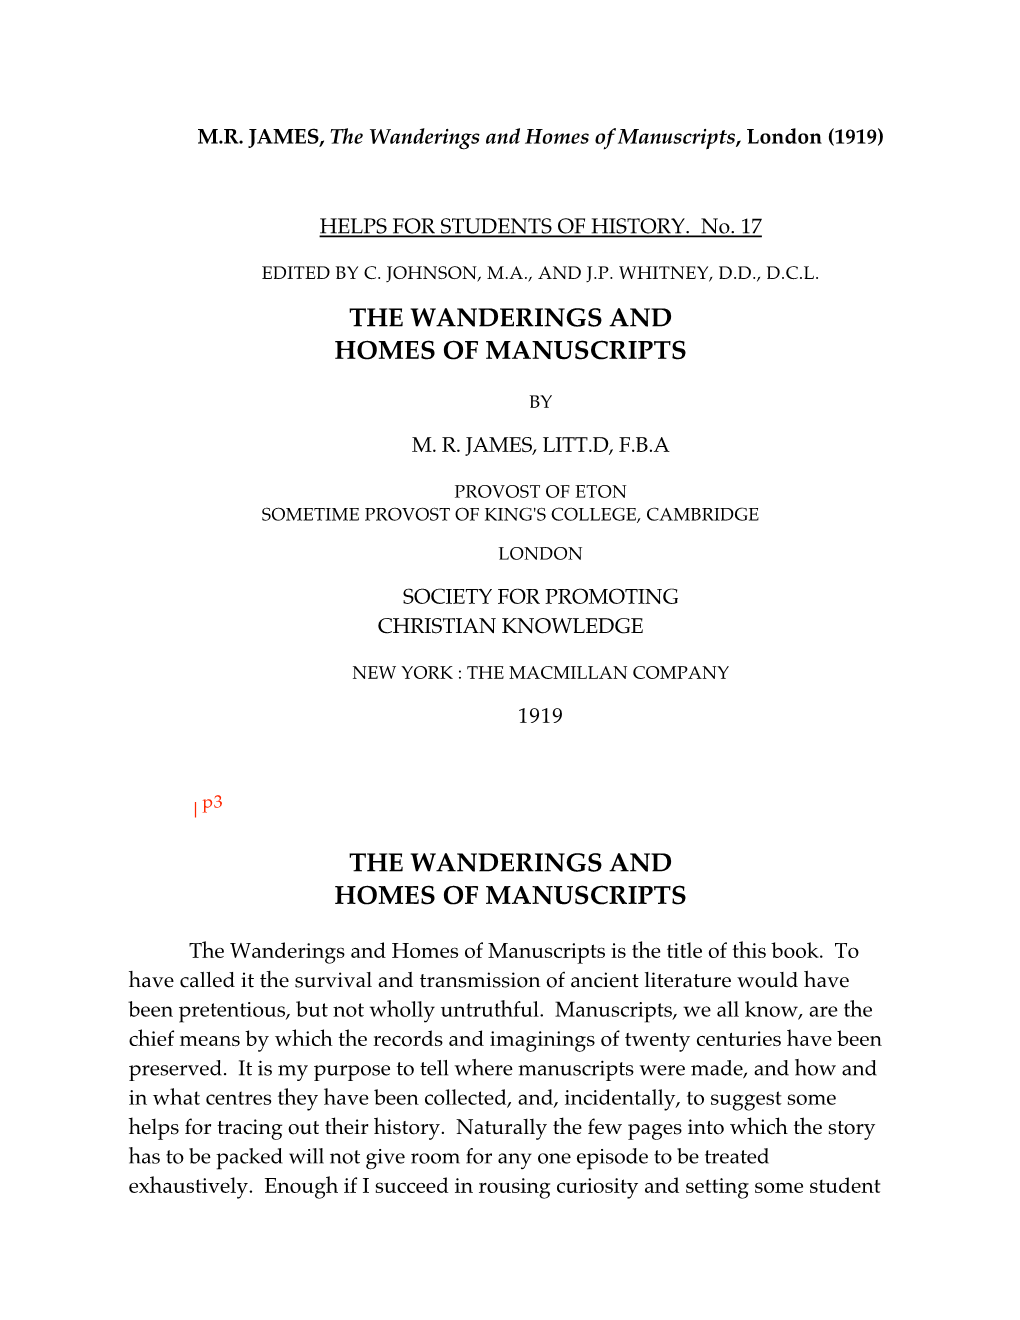 The Wanderings and Homes of Manuscripts the Wanderings and Homes of Manuscripts